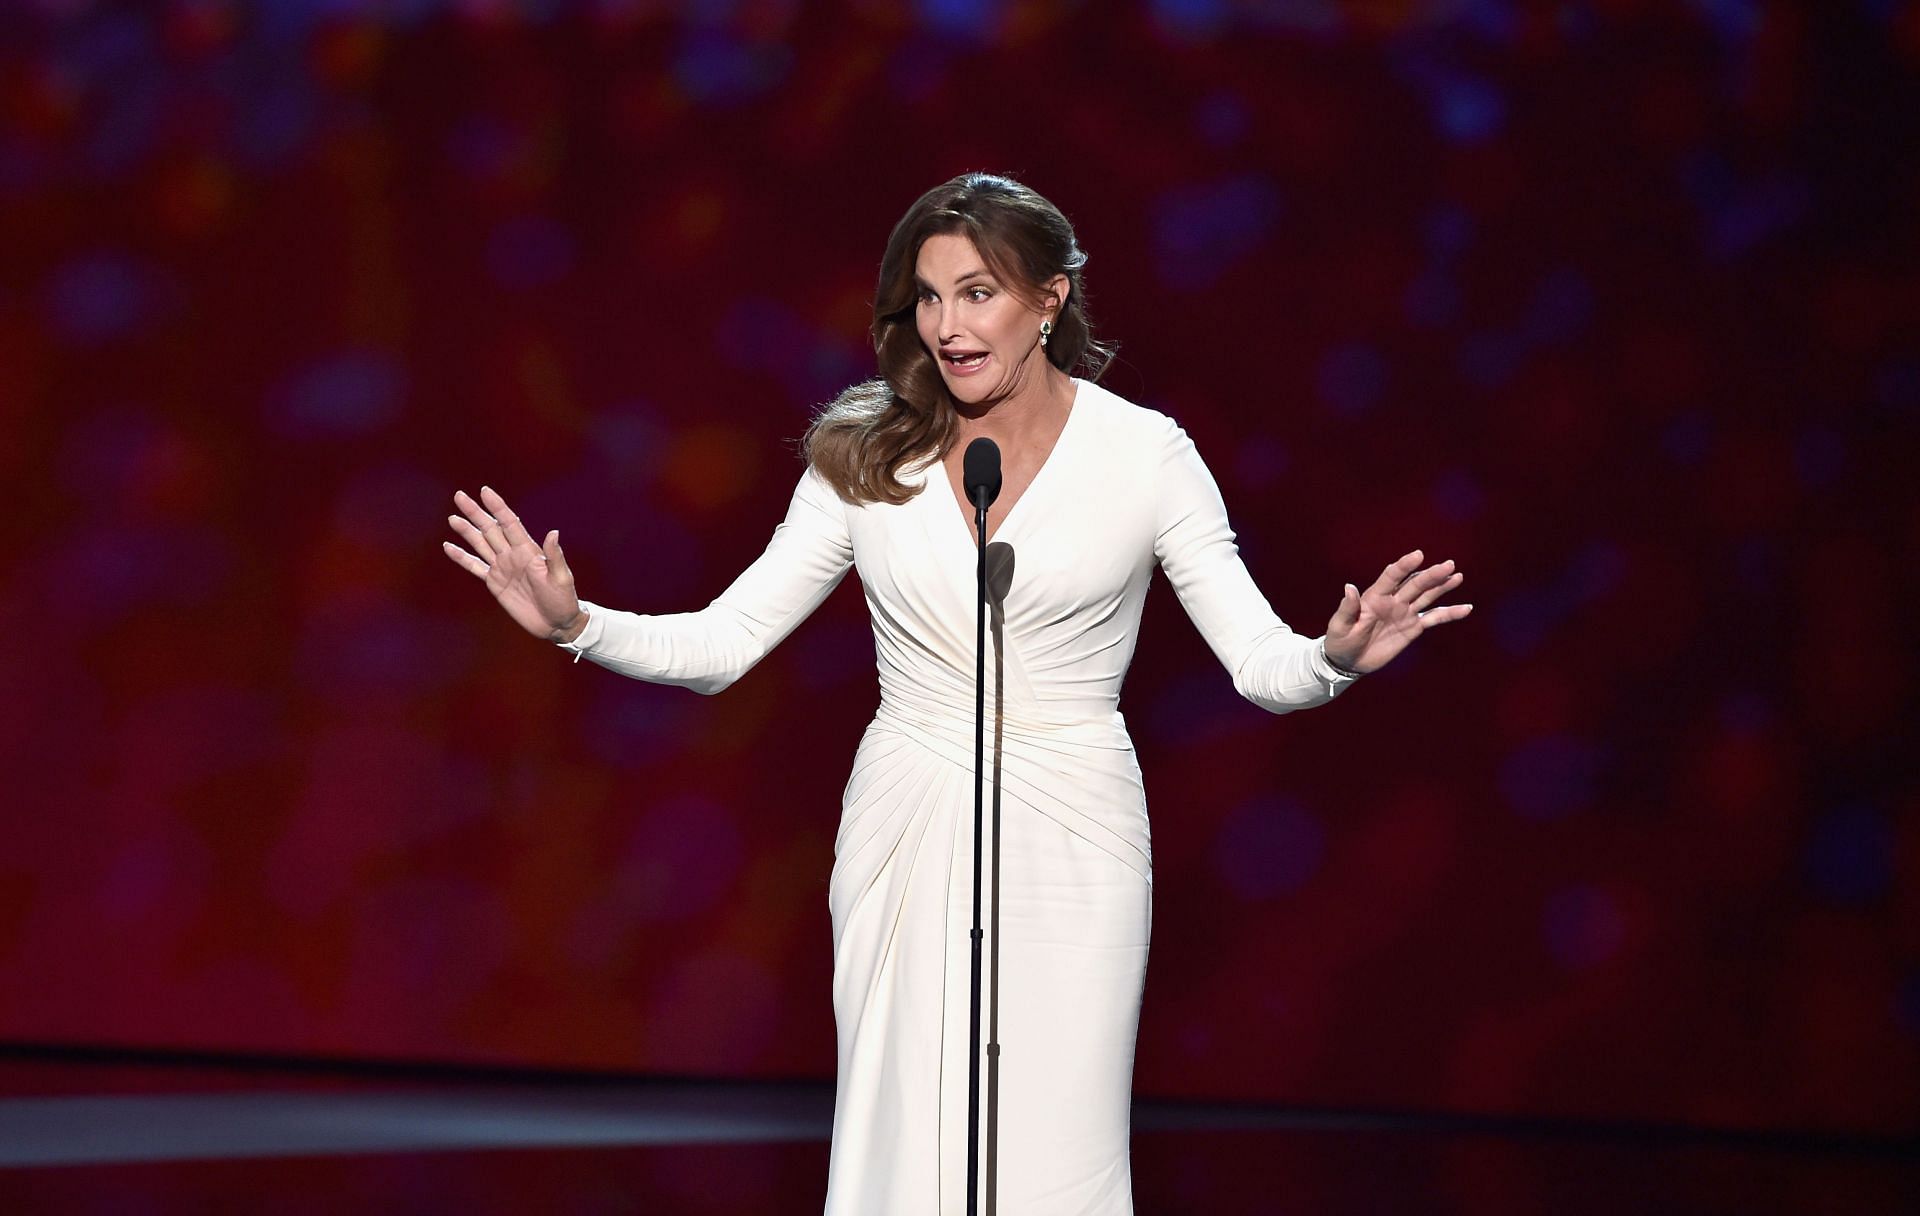 Caitlyn Jenner at The 2015 ESPYS - Show